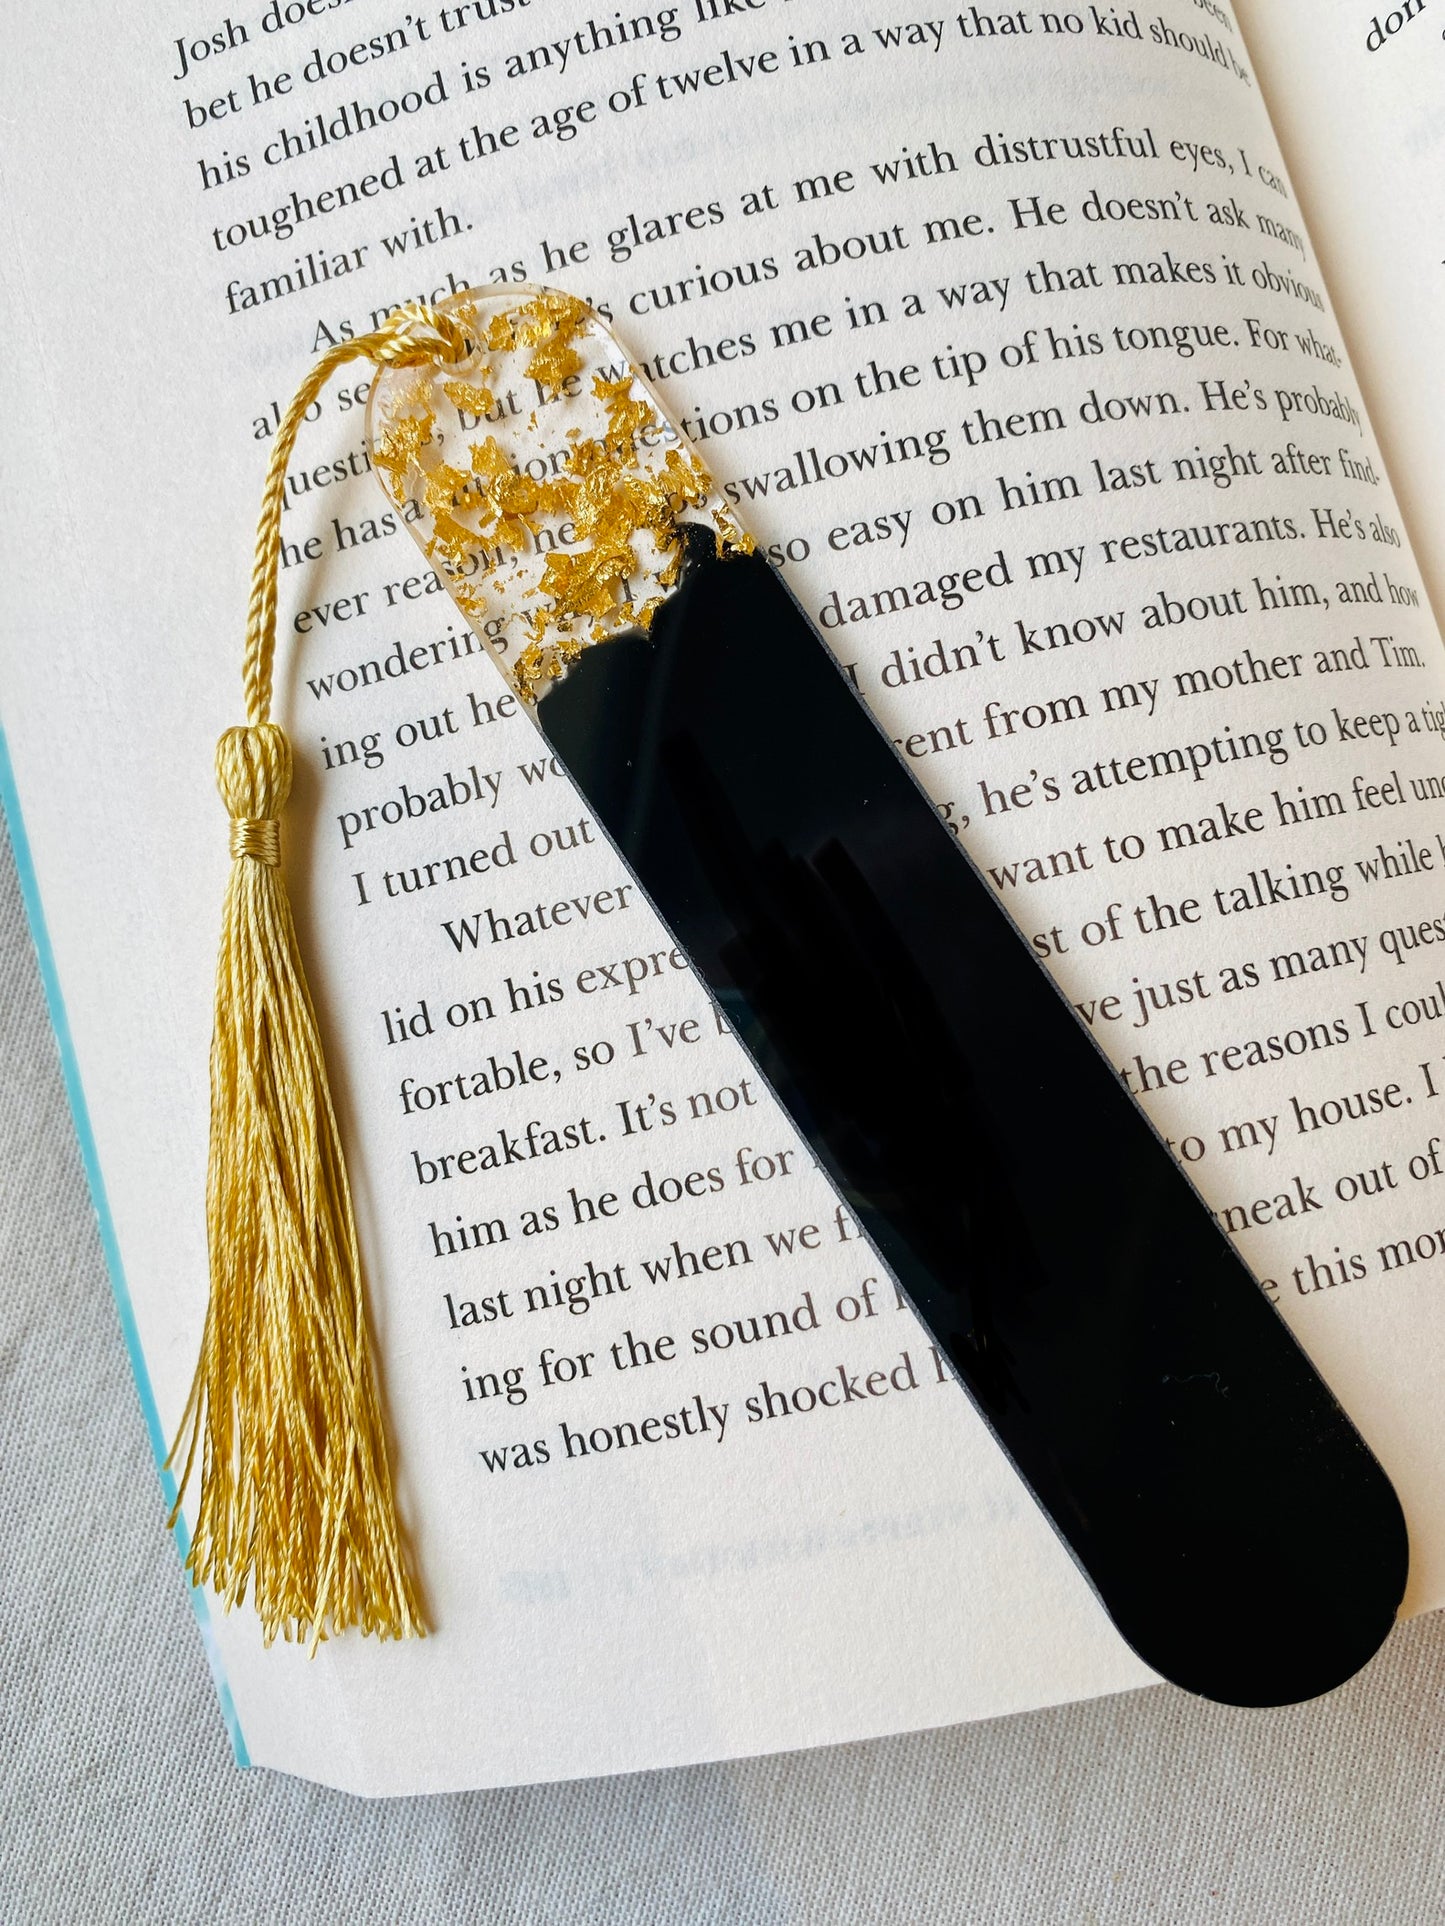 BOOKMARK - created in black resin with gold flakes - limited edition